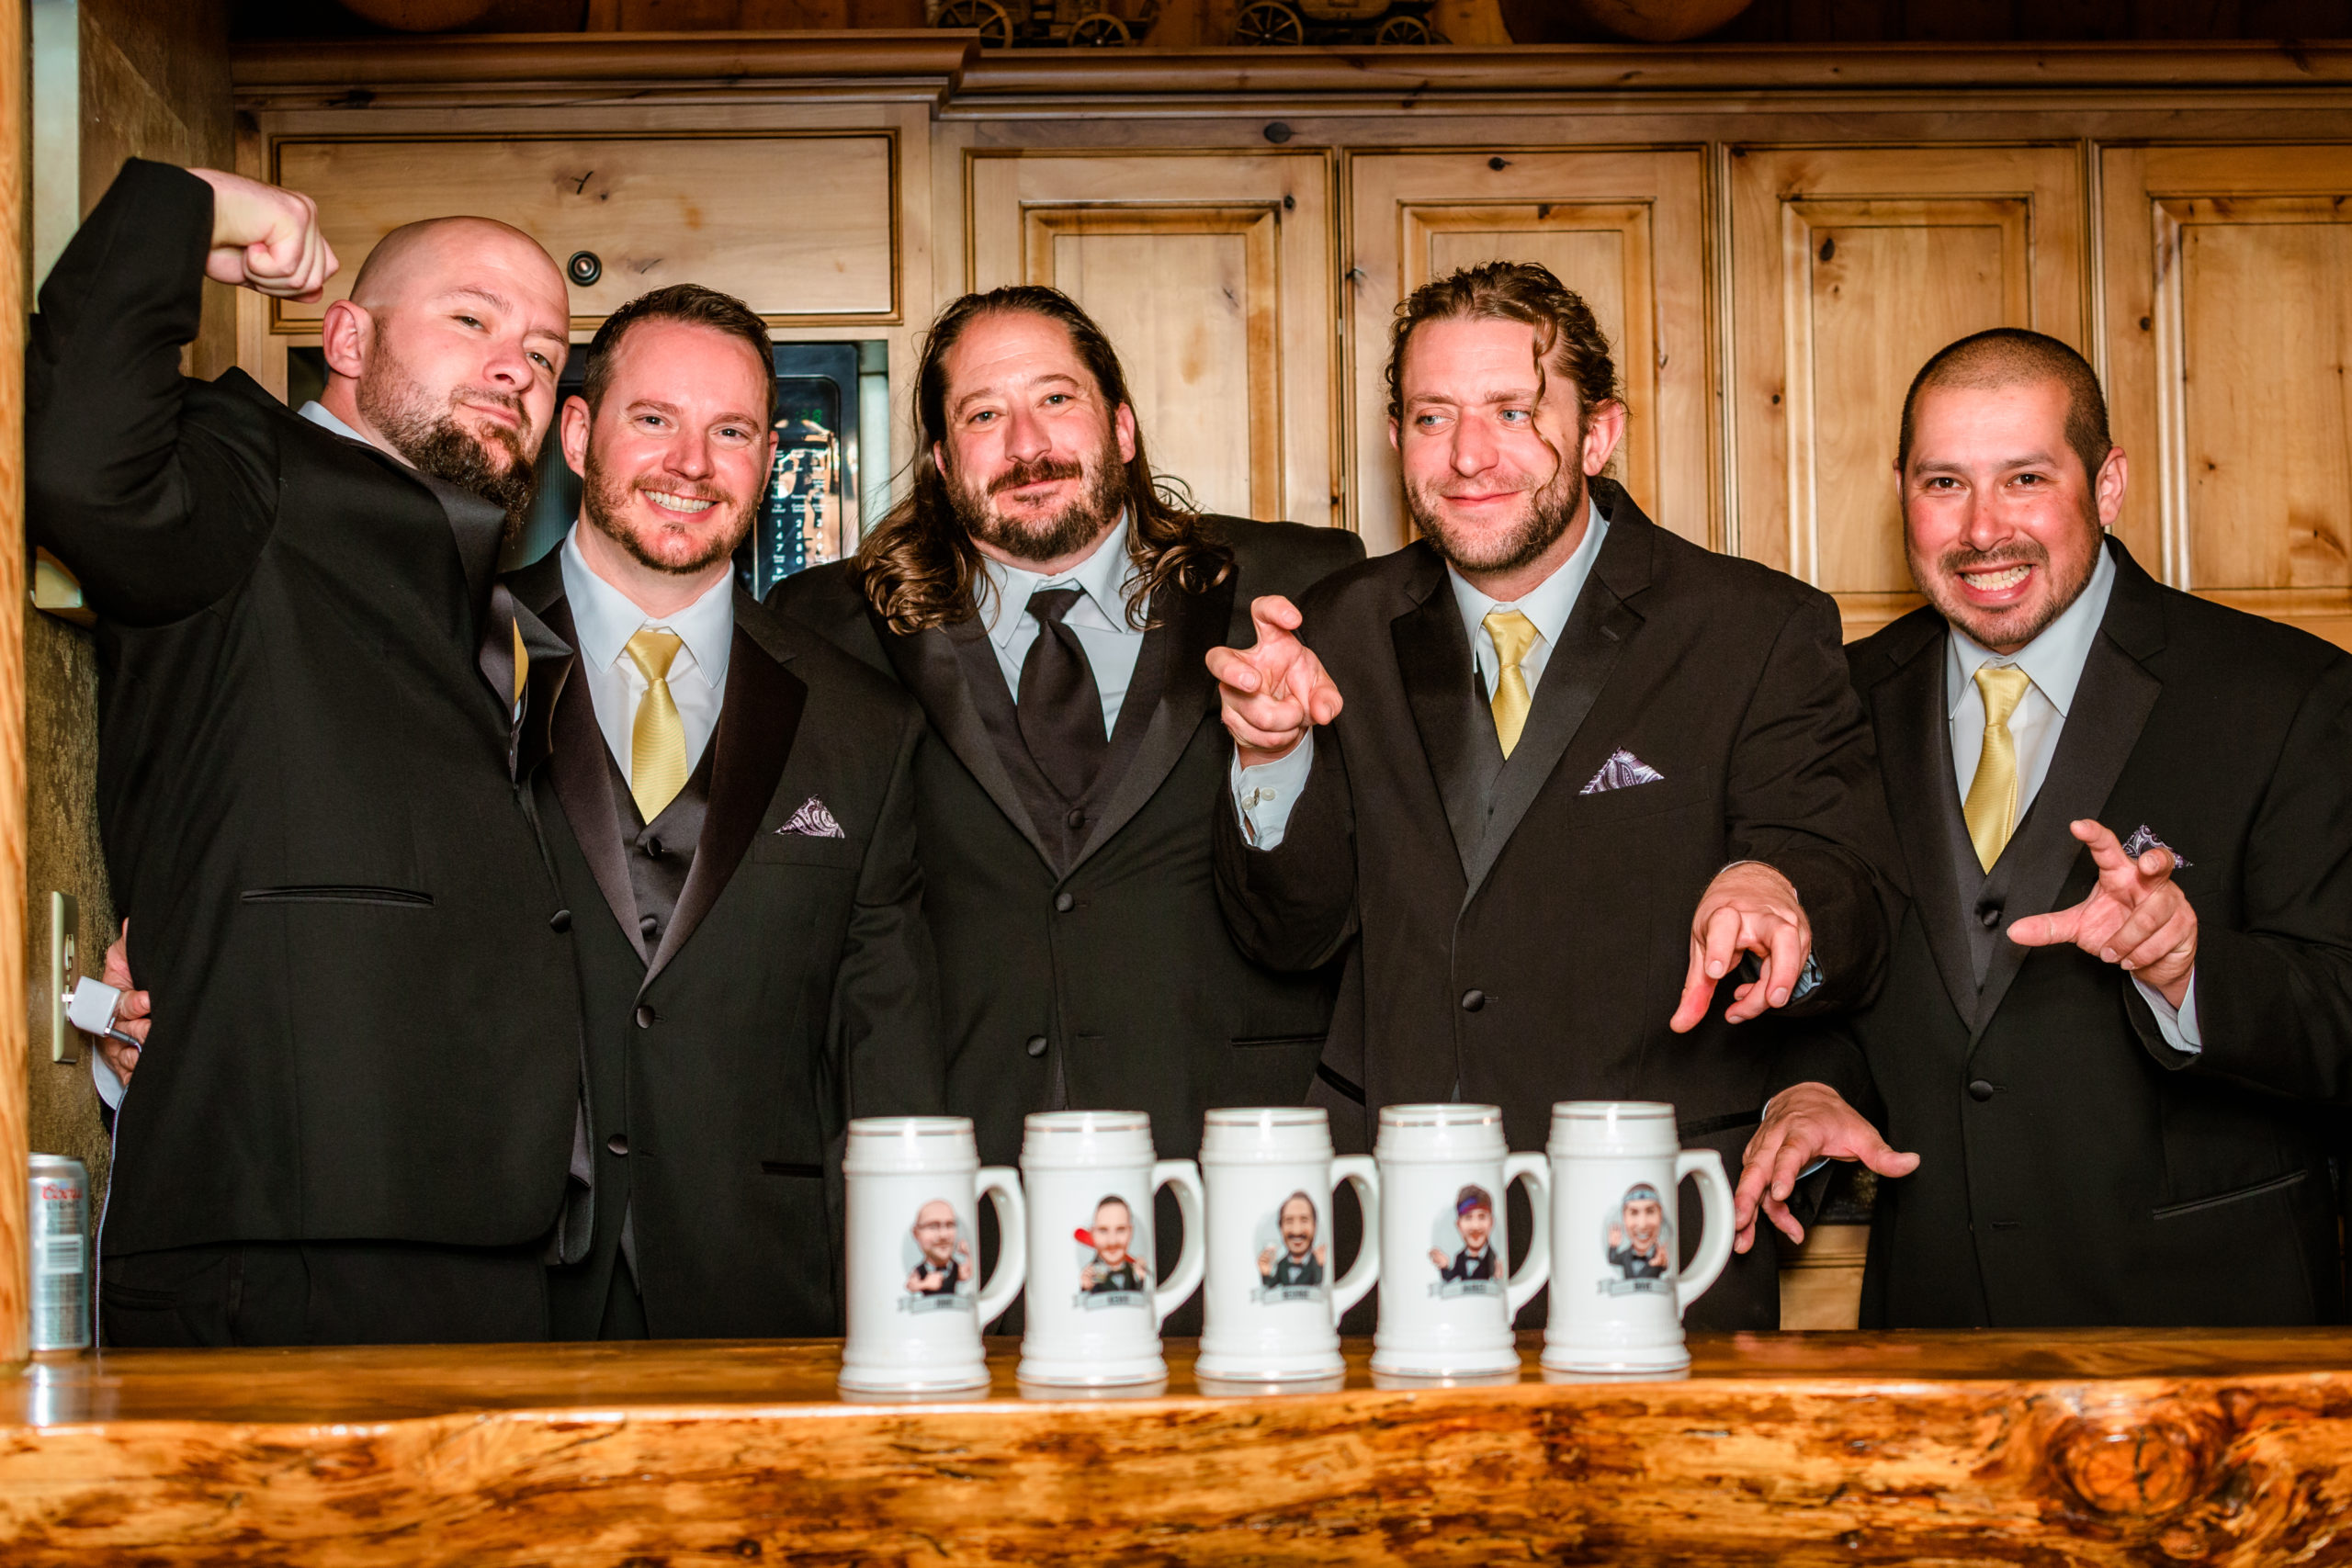 groom and groomsmen in tuxs posing with personalized beer mug